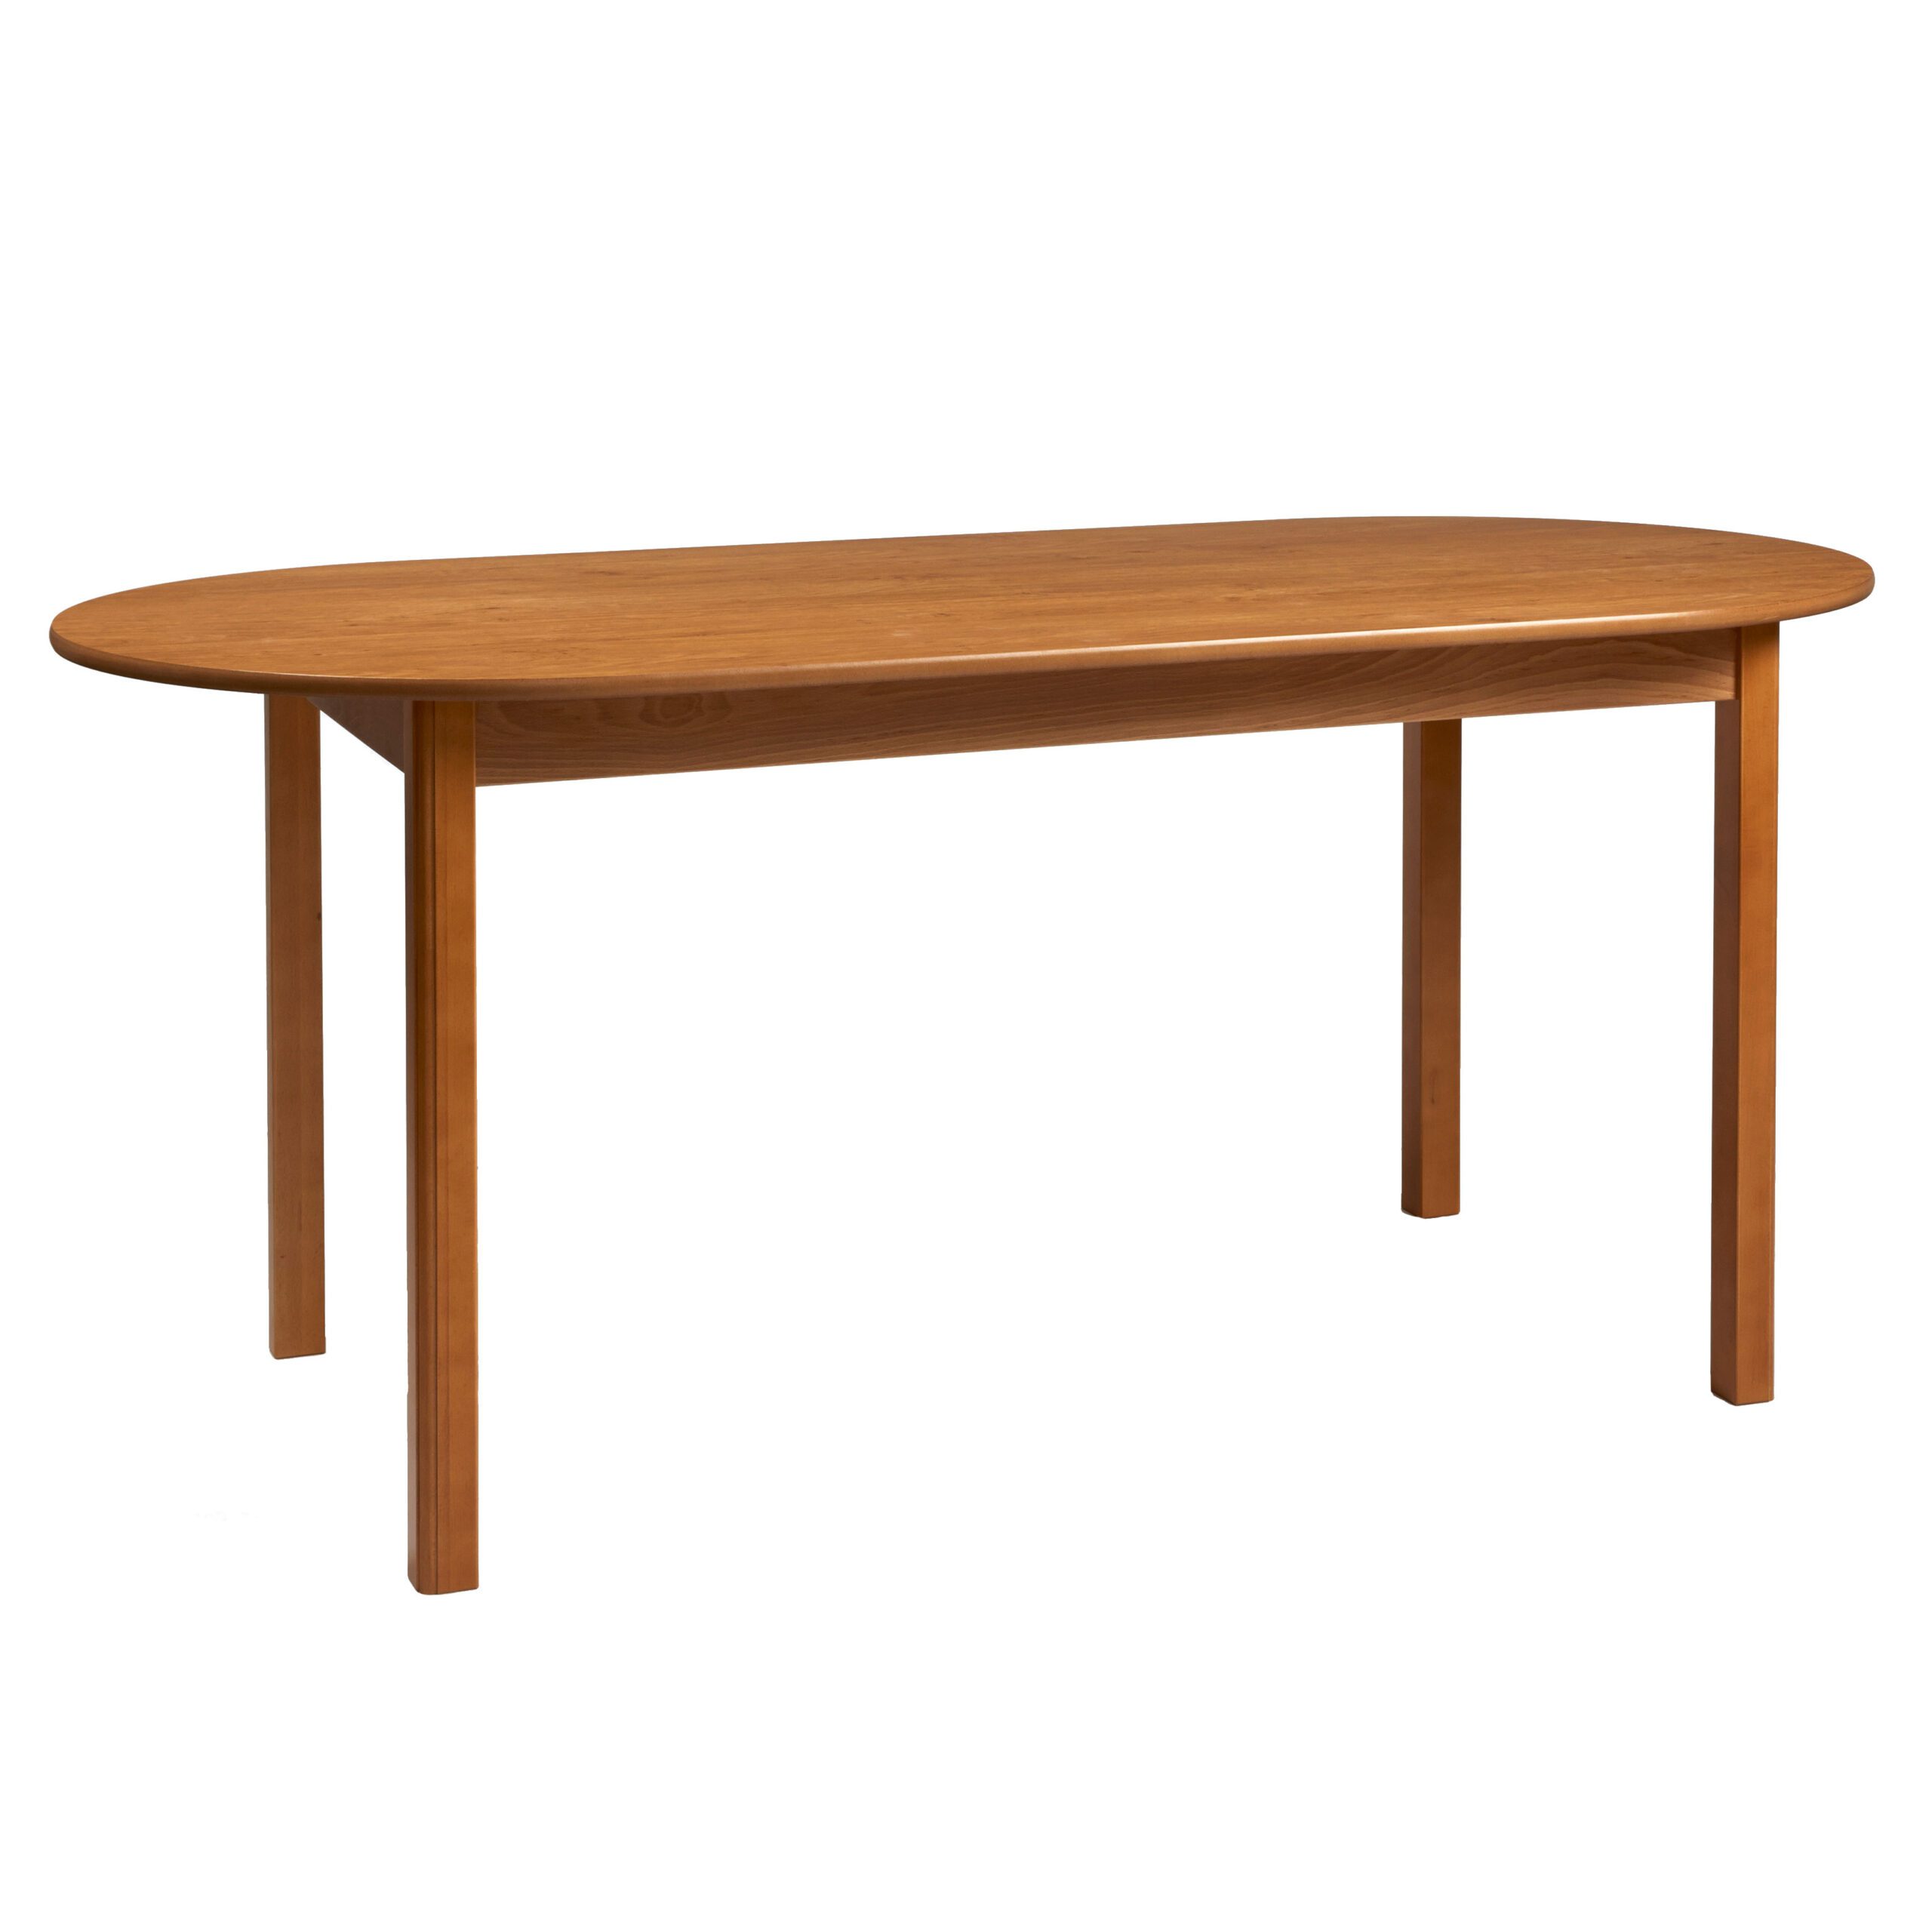 Earlwood D End 6 Seater Dining Table